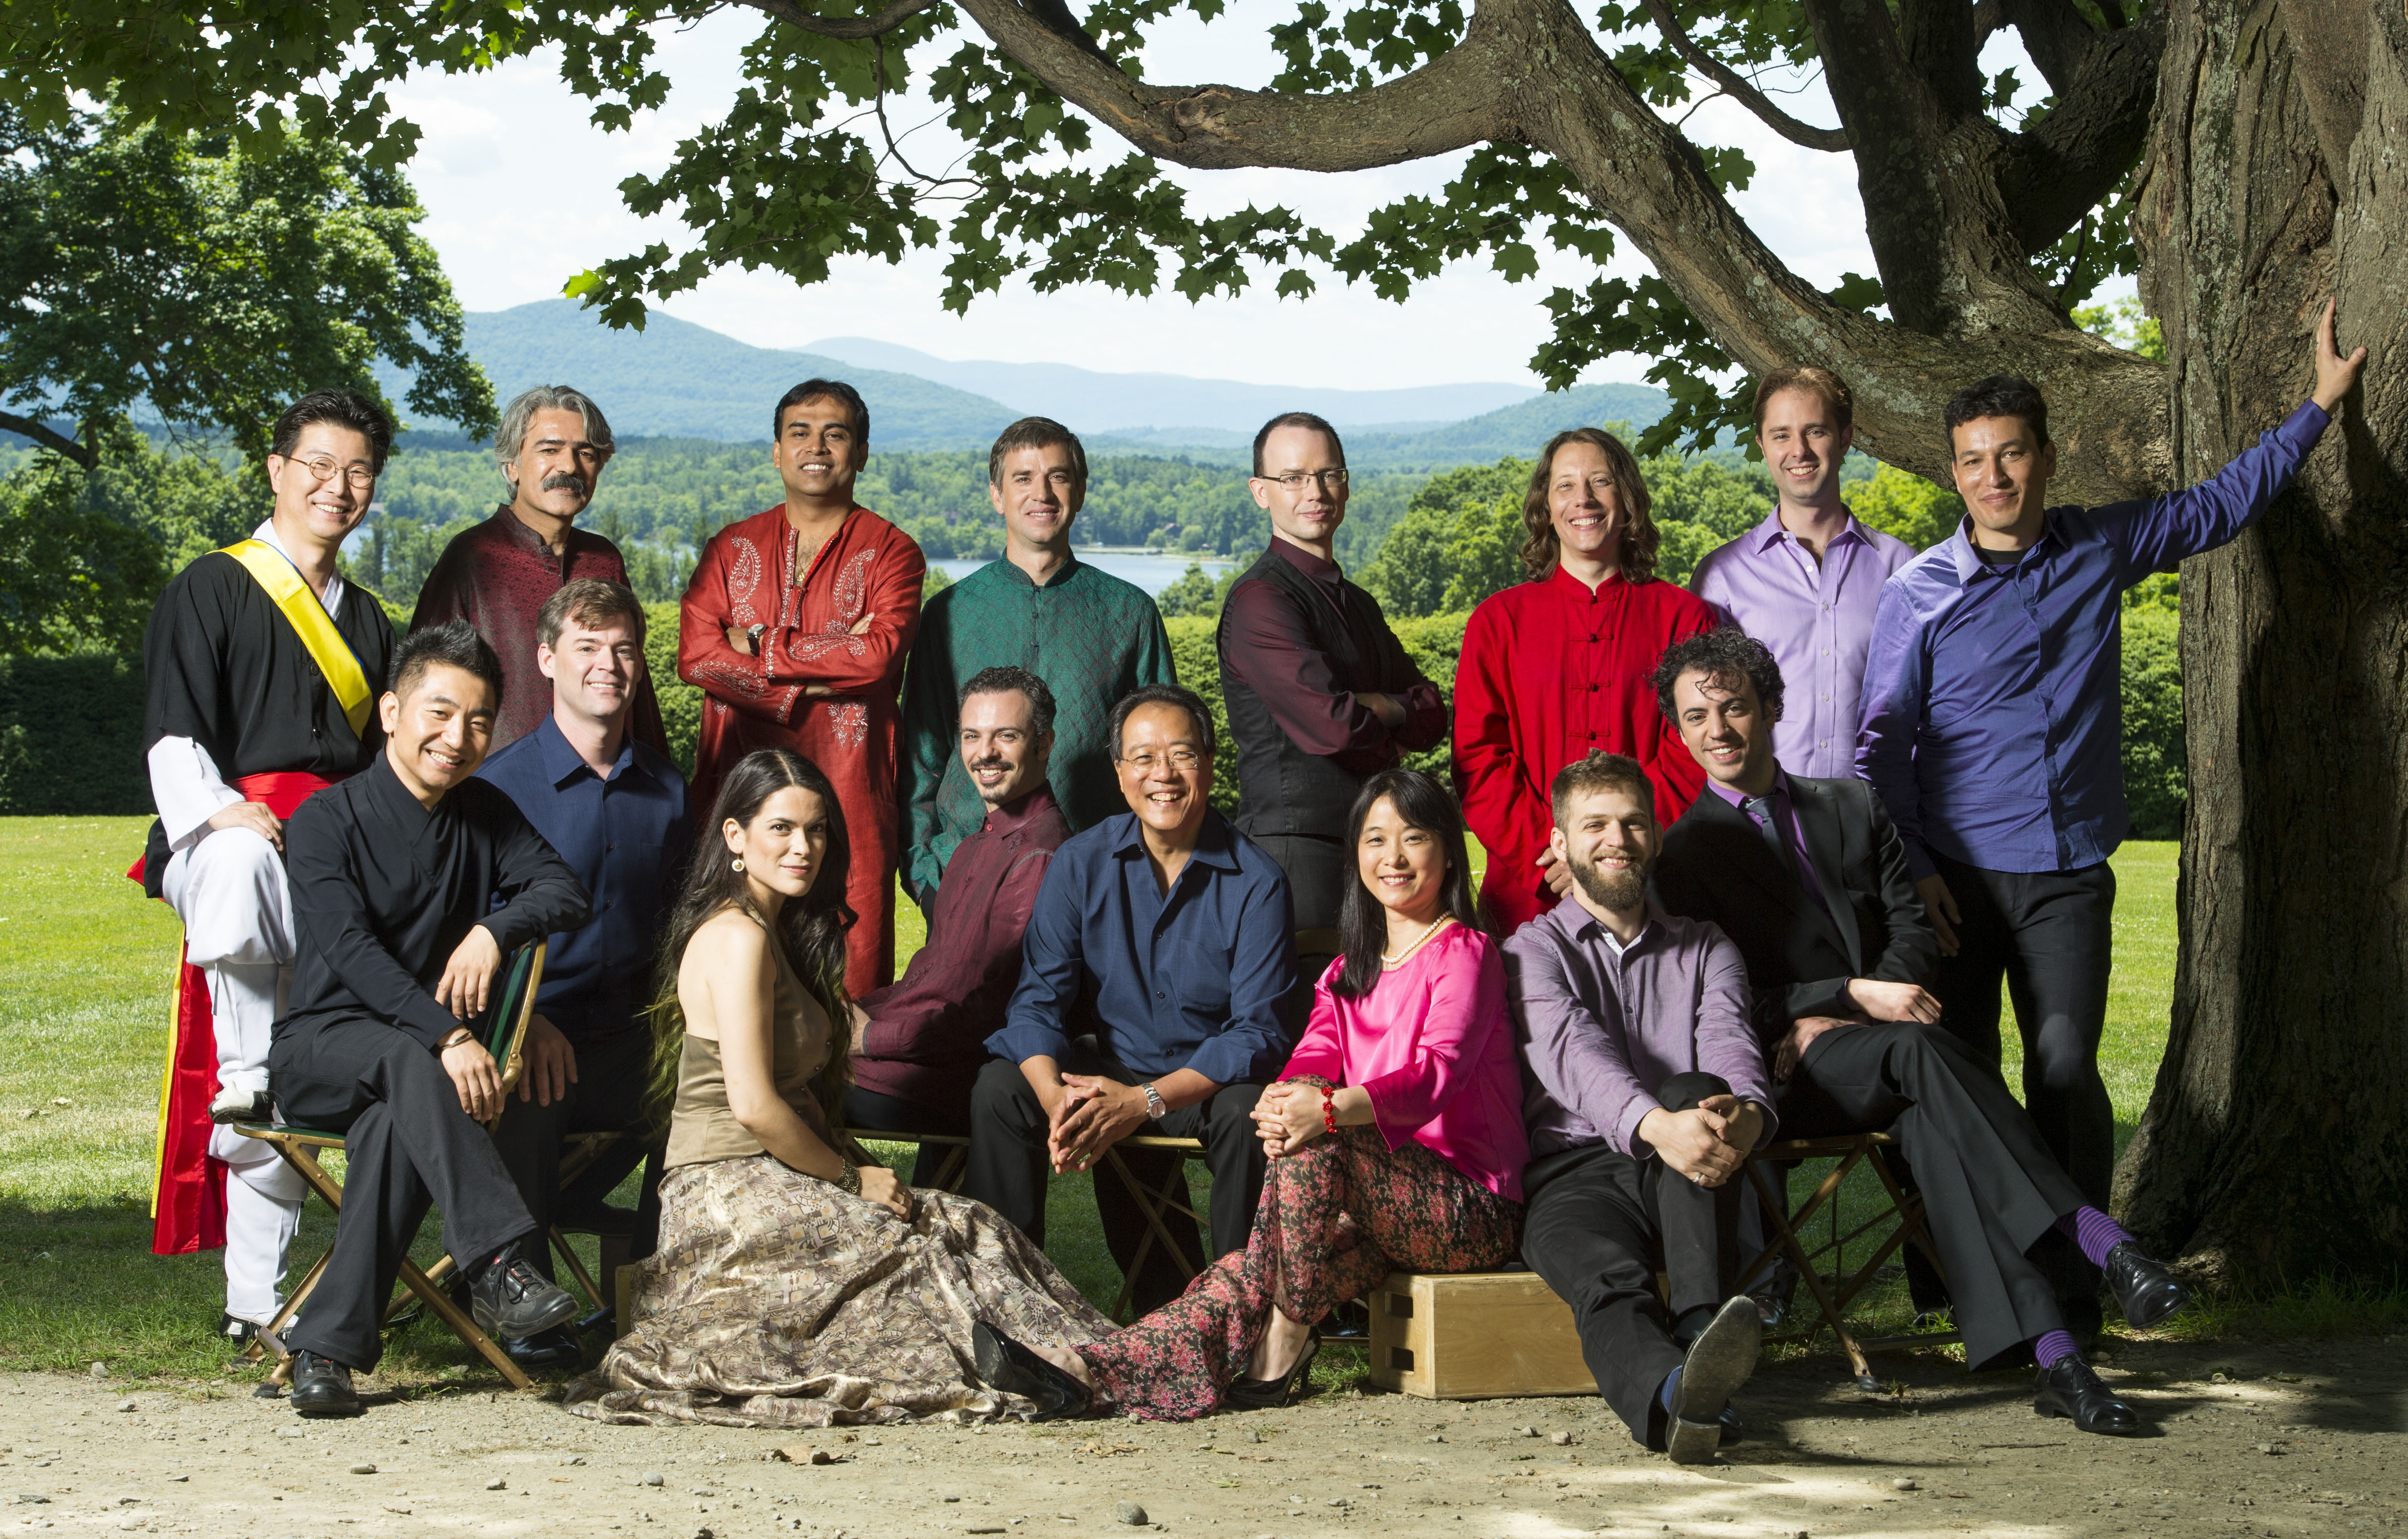 The Silk Road Ensemble. (Photo: C. Taylor Crothers)